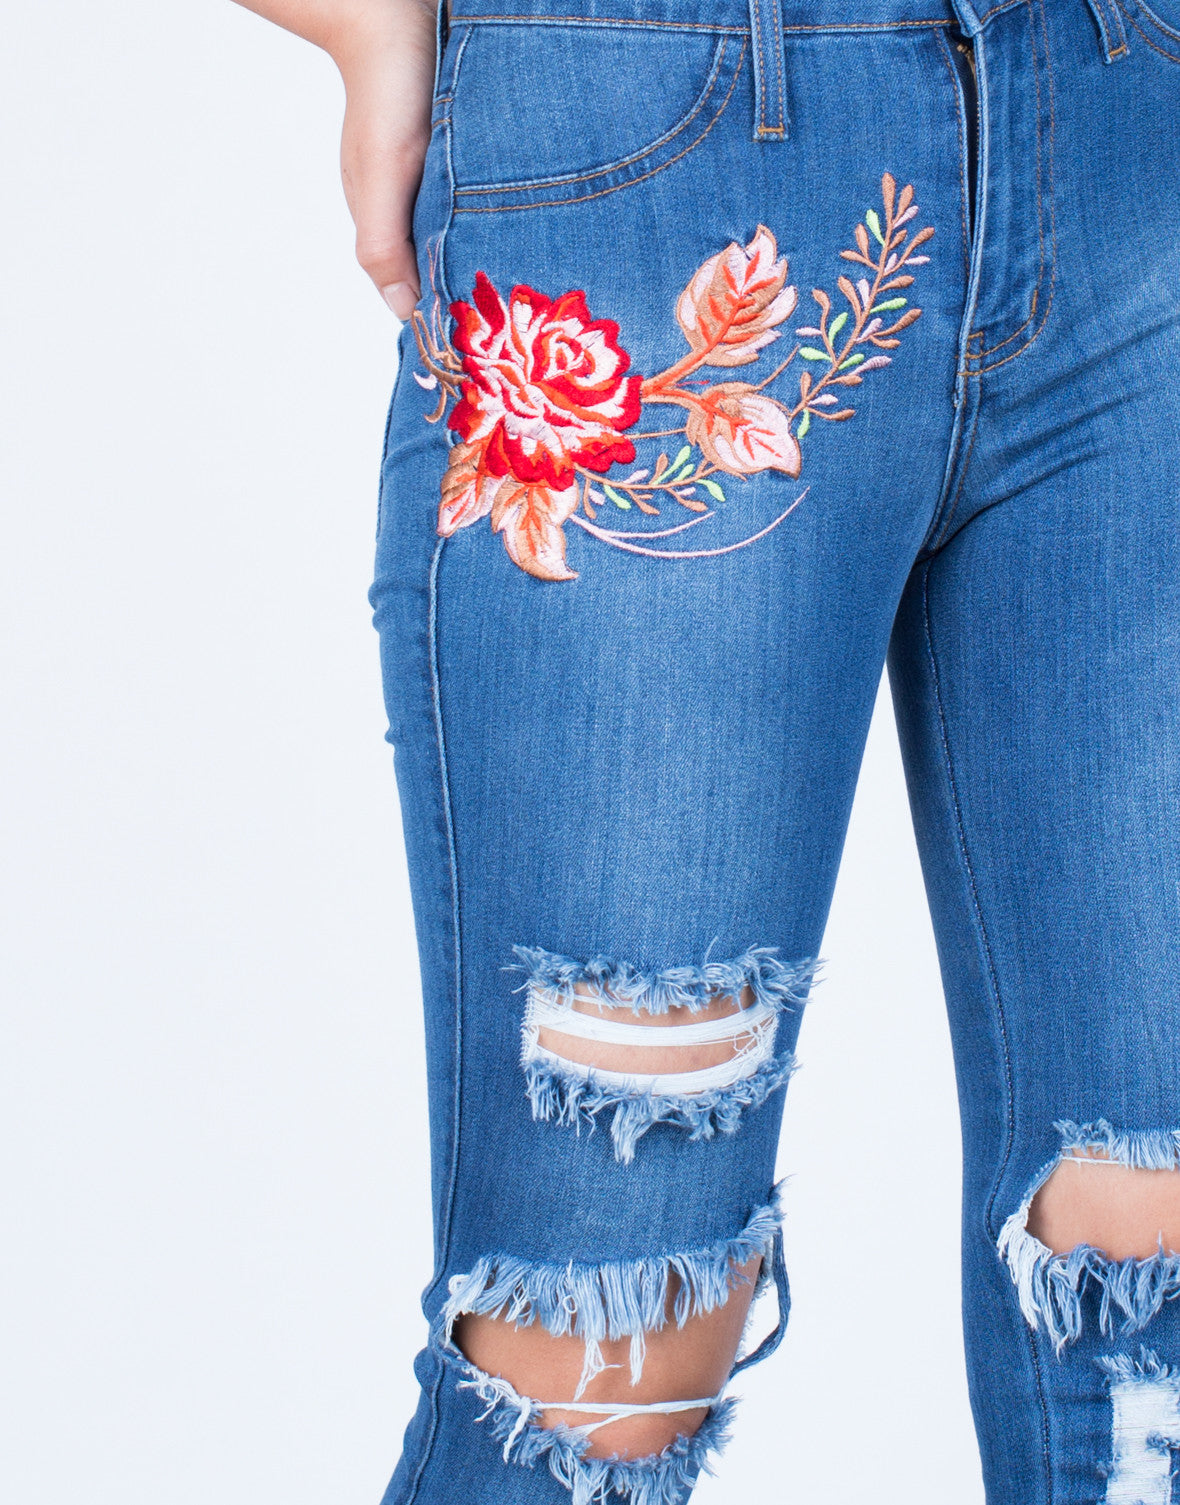 Rose Embroidered Jeans Floral Embroidered Jeans Blue Denim Jeans 2020ave - roblox rose embroidered jeans